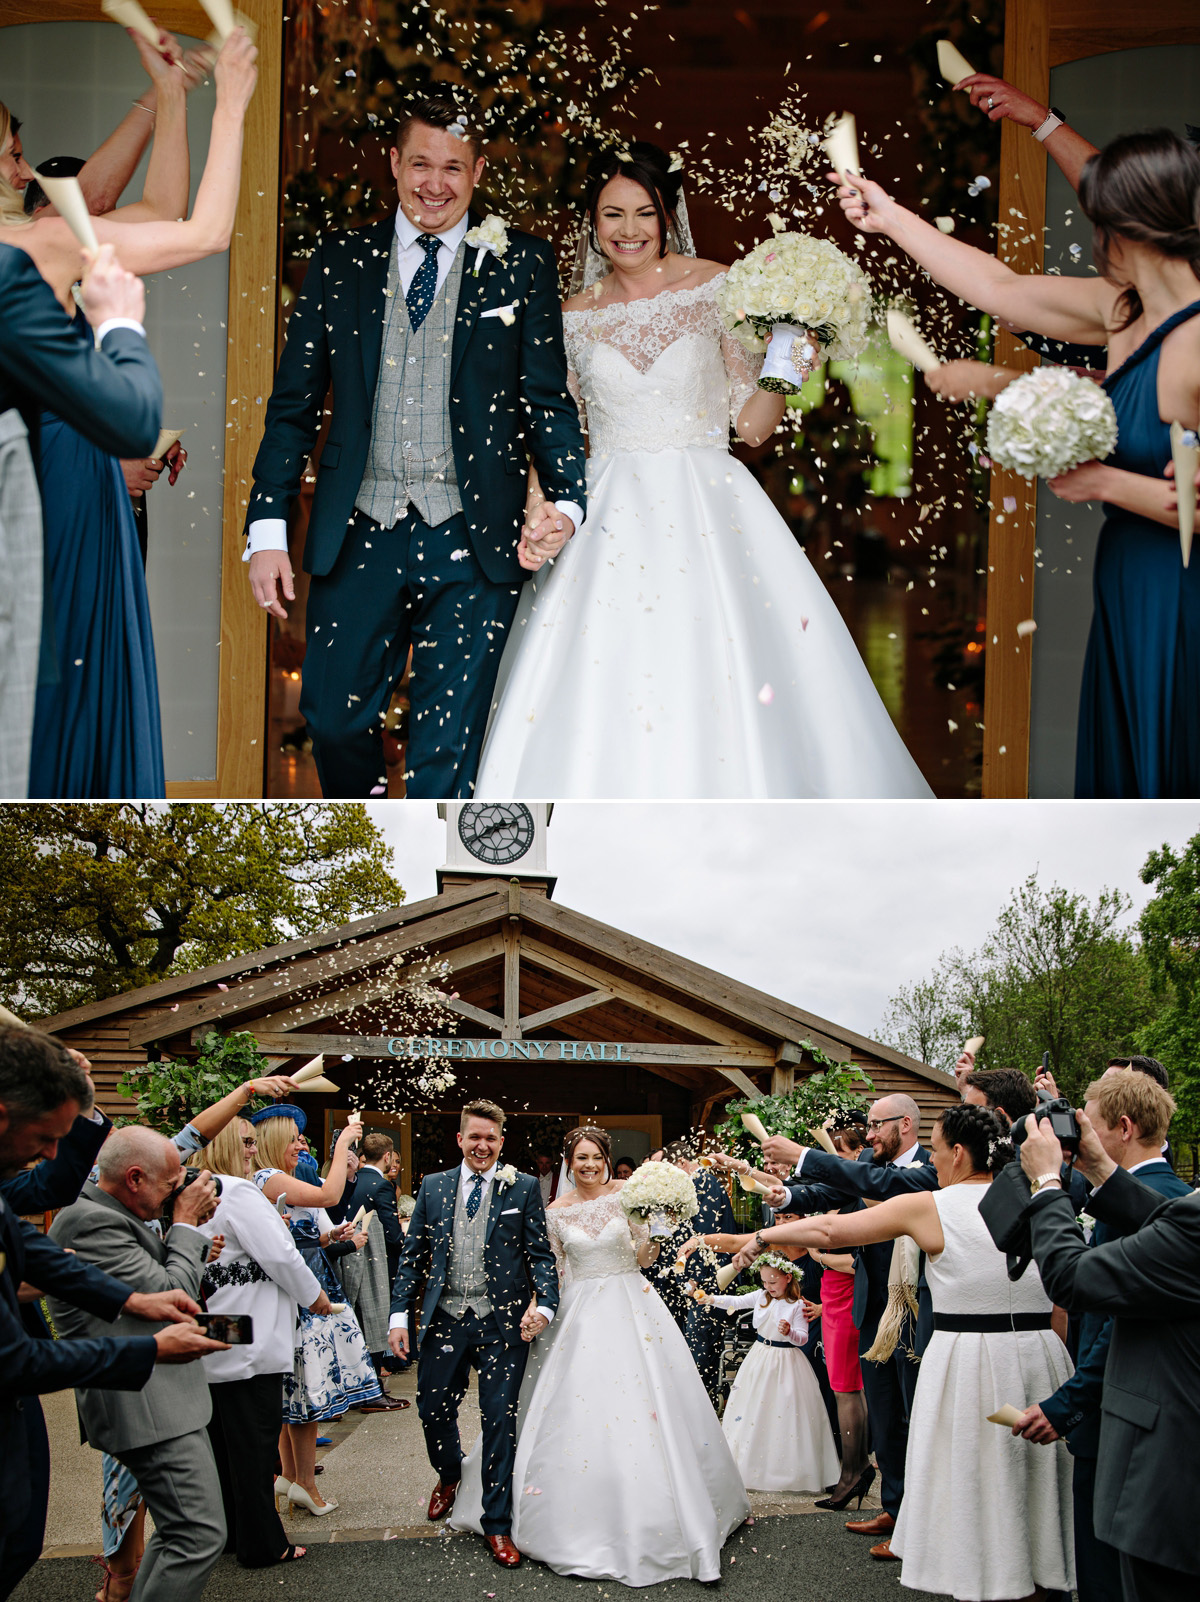 Amazing fun as guests shower the bride and groom with wedding confetti